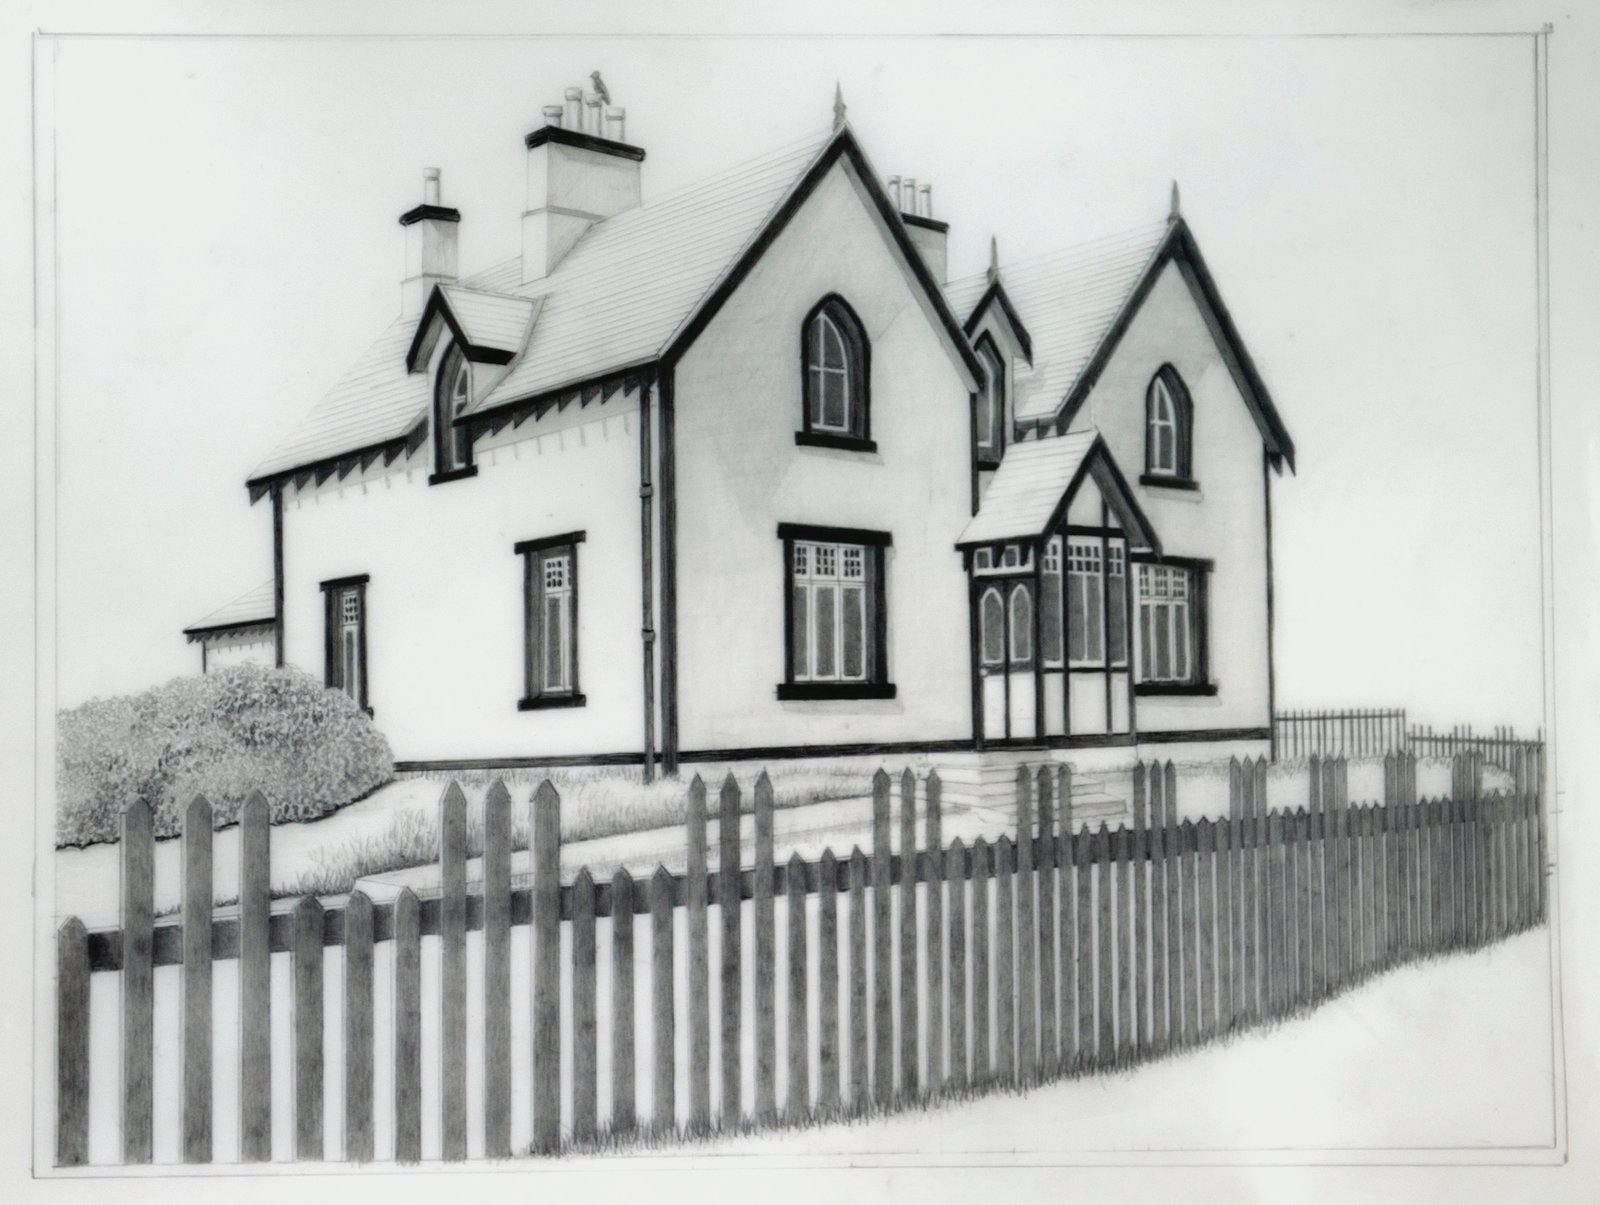 The House at St. Abbs